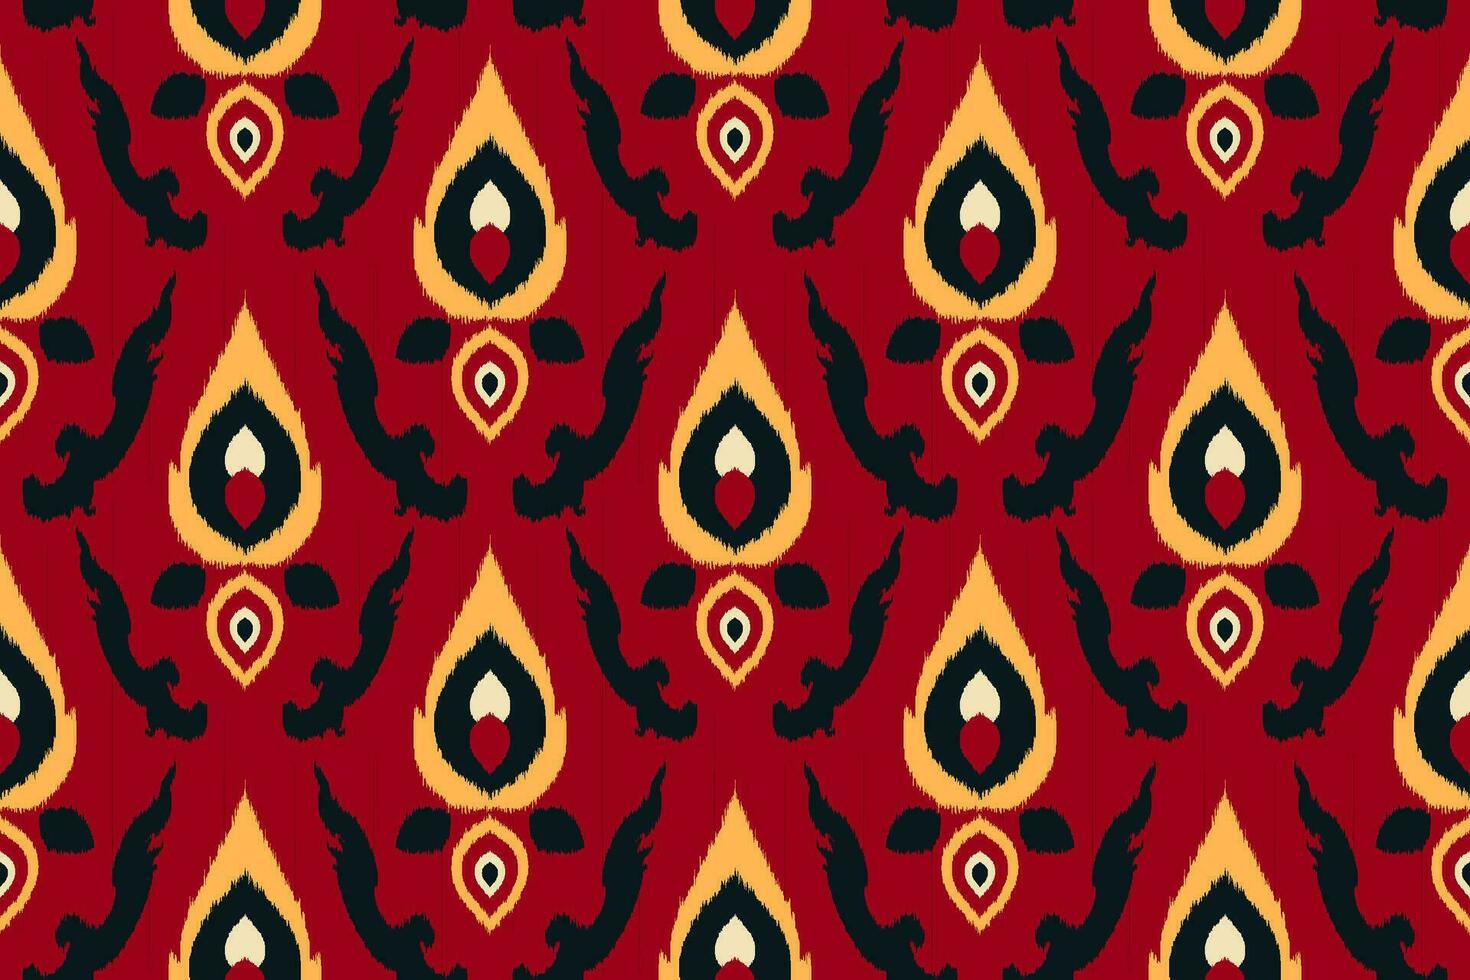 Beautiful Ethnic abstract ikat art. Seamless Kasuri pattern in tribal,folk embroidery,geometric art ornament print.Design for fabric, clothing, carpet, wallpaper, wrapping, cover vector